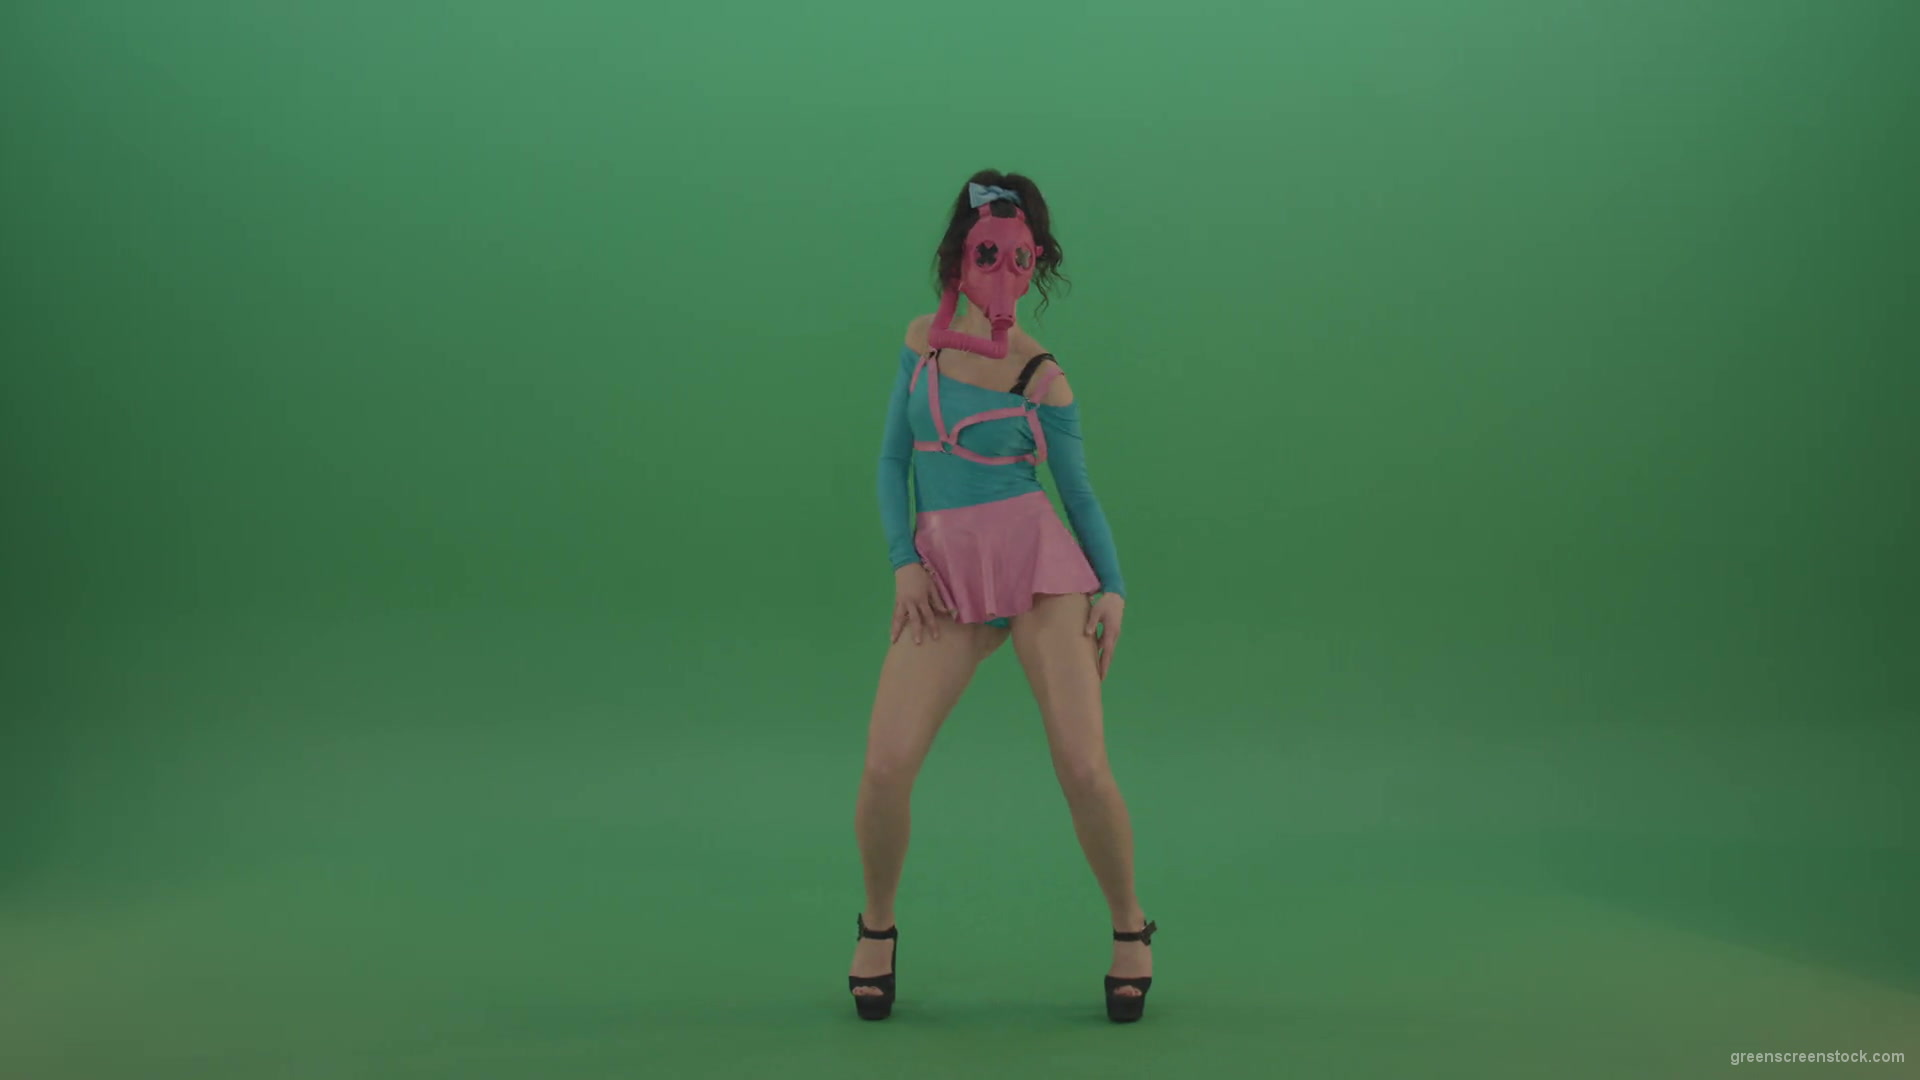 Fetish-Go-Go-Girl-dancing-in-pink-gas-mask-over-green-screen-4K-Video-Footage-1920_005 Green Screen Stock